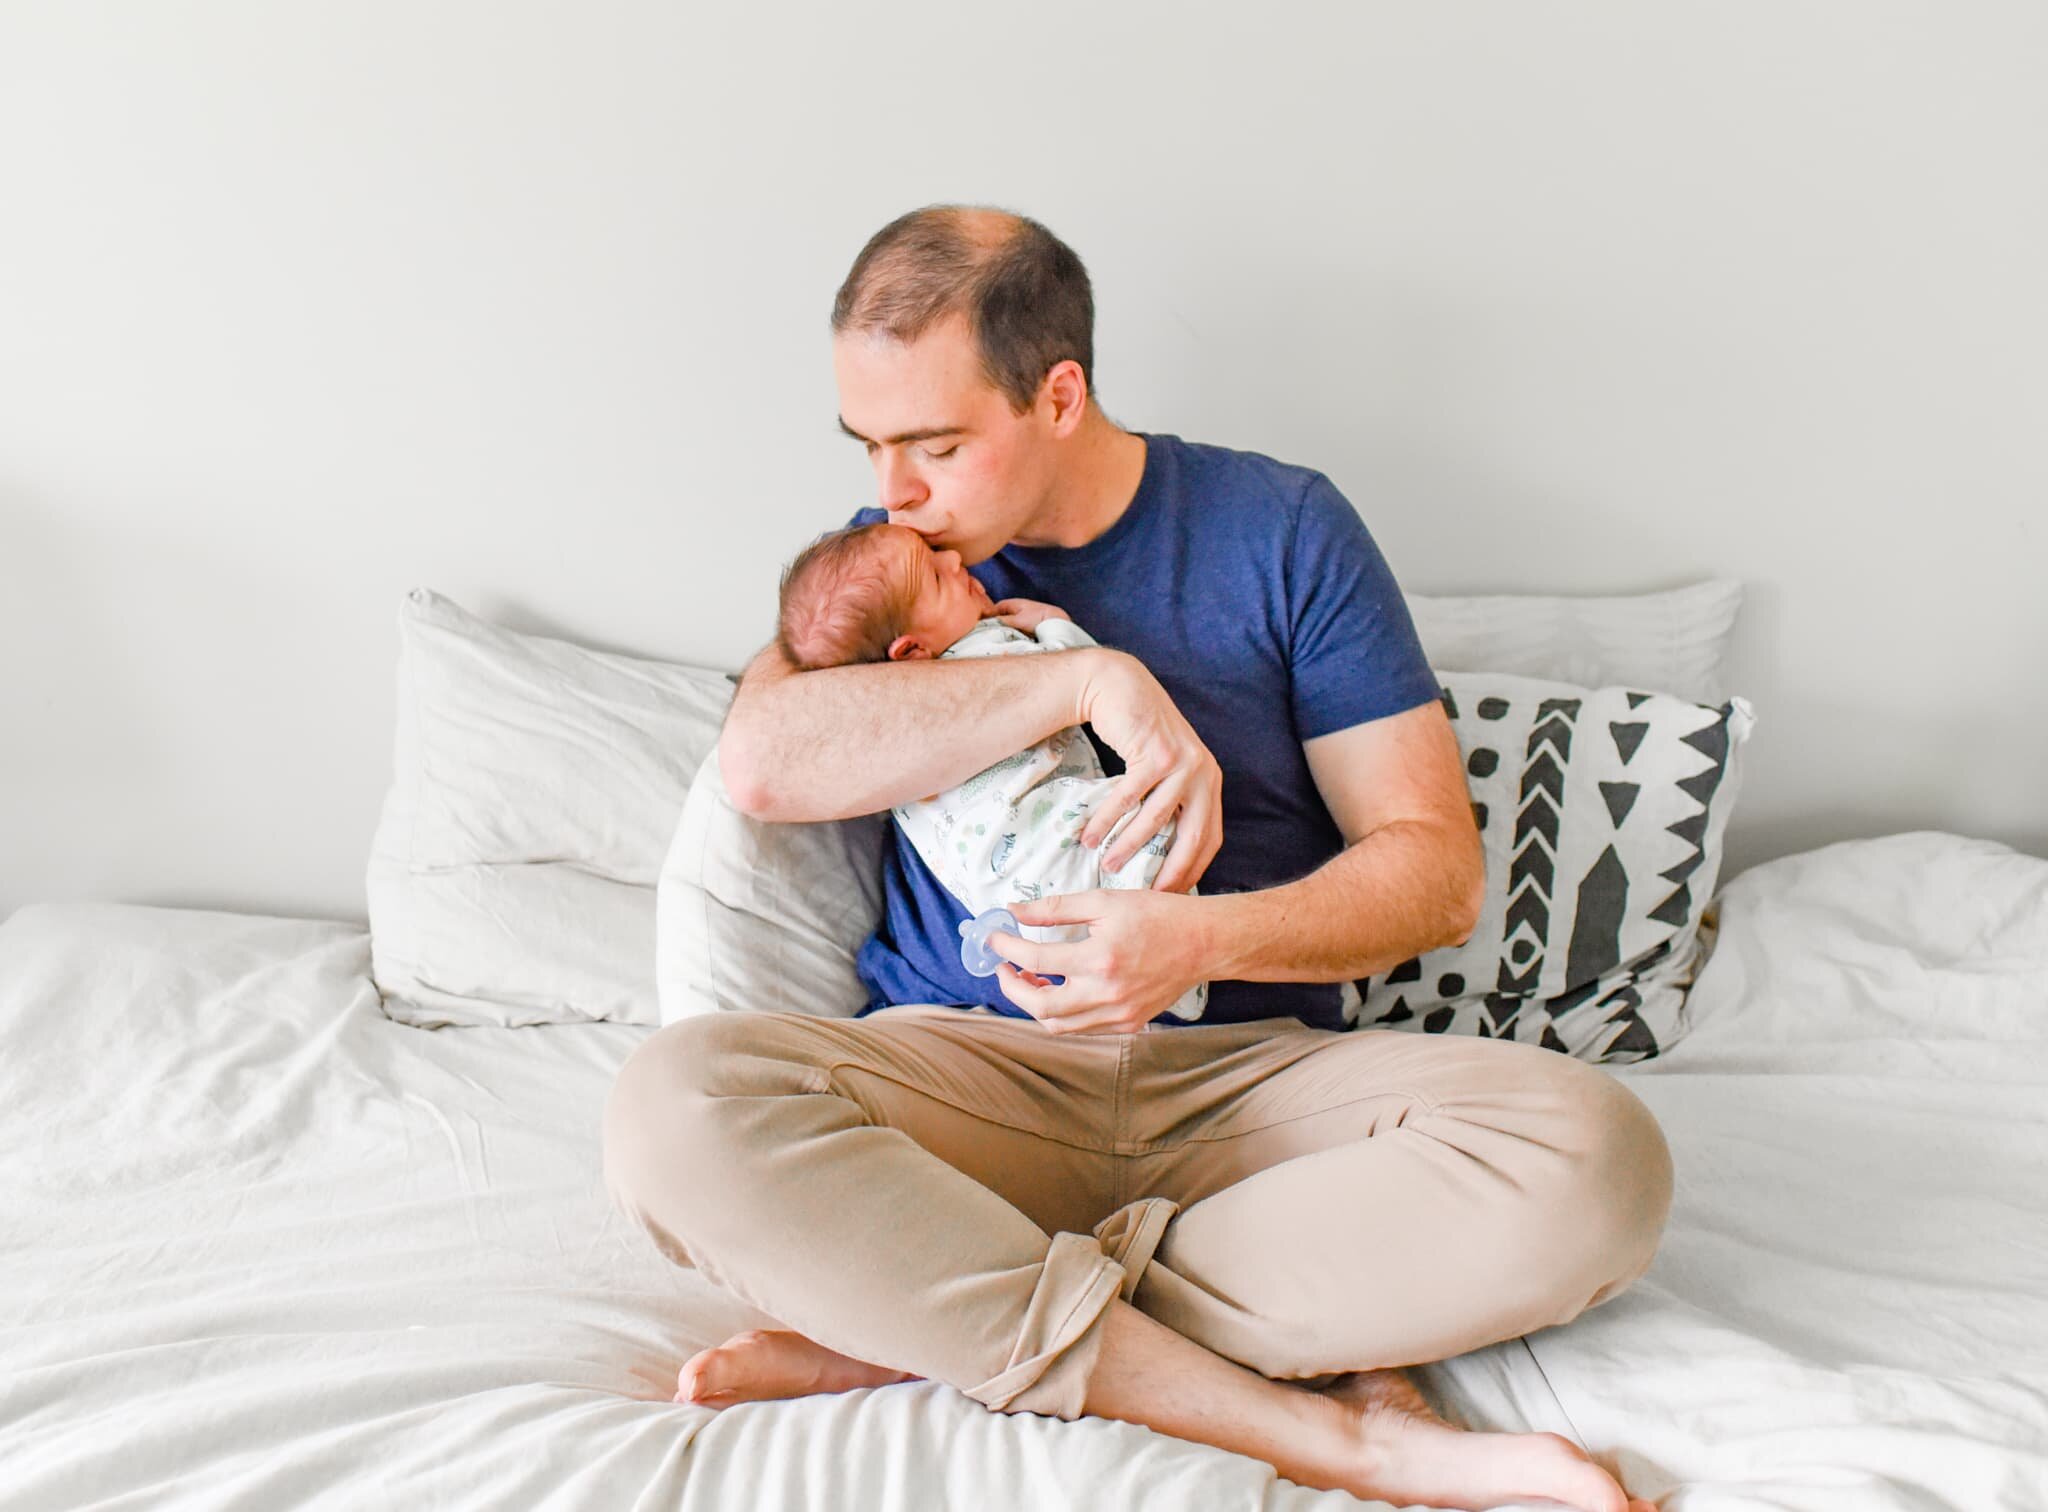 Rockville Maryland Newborn Photographer - dad sitting on bed with baby